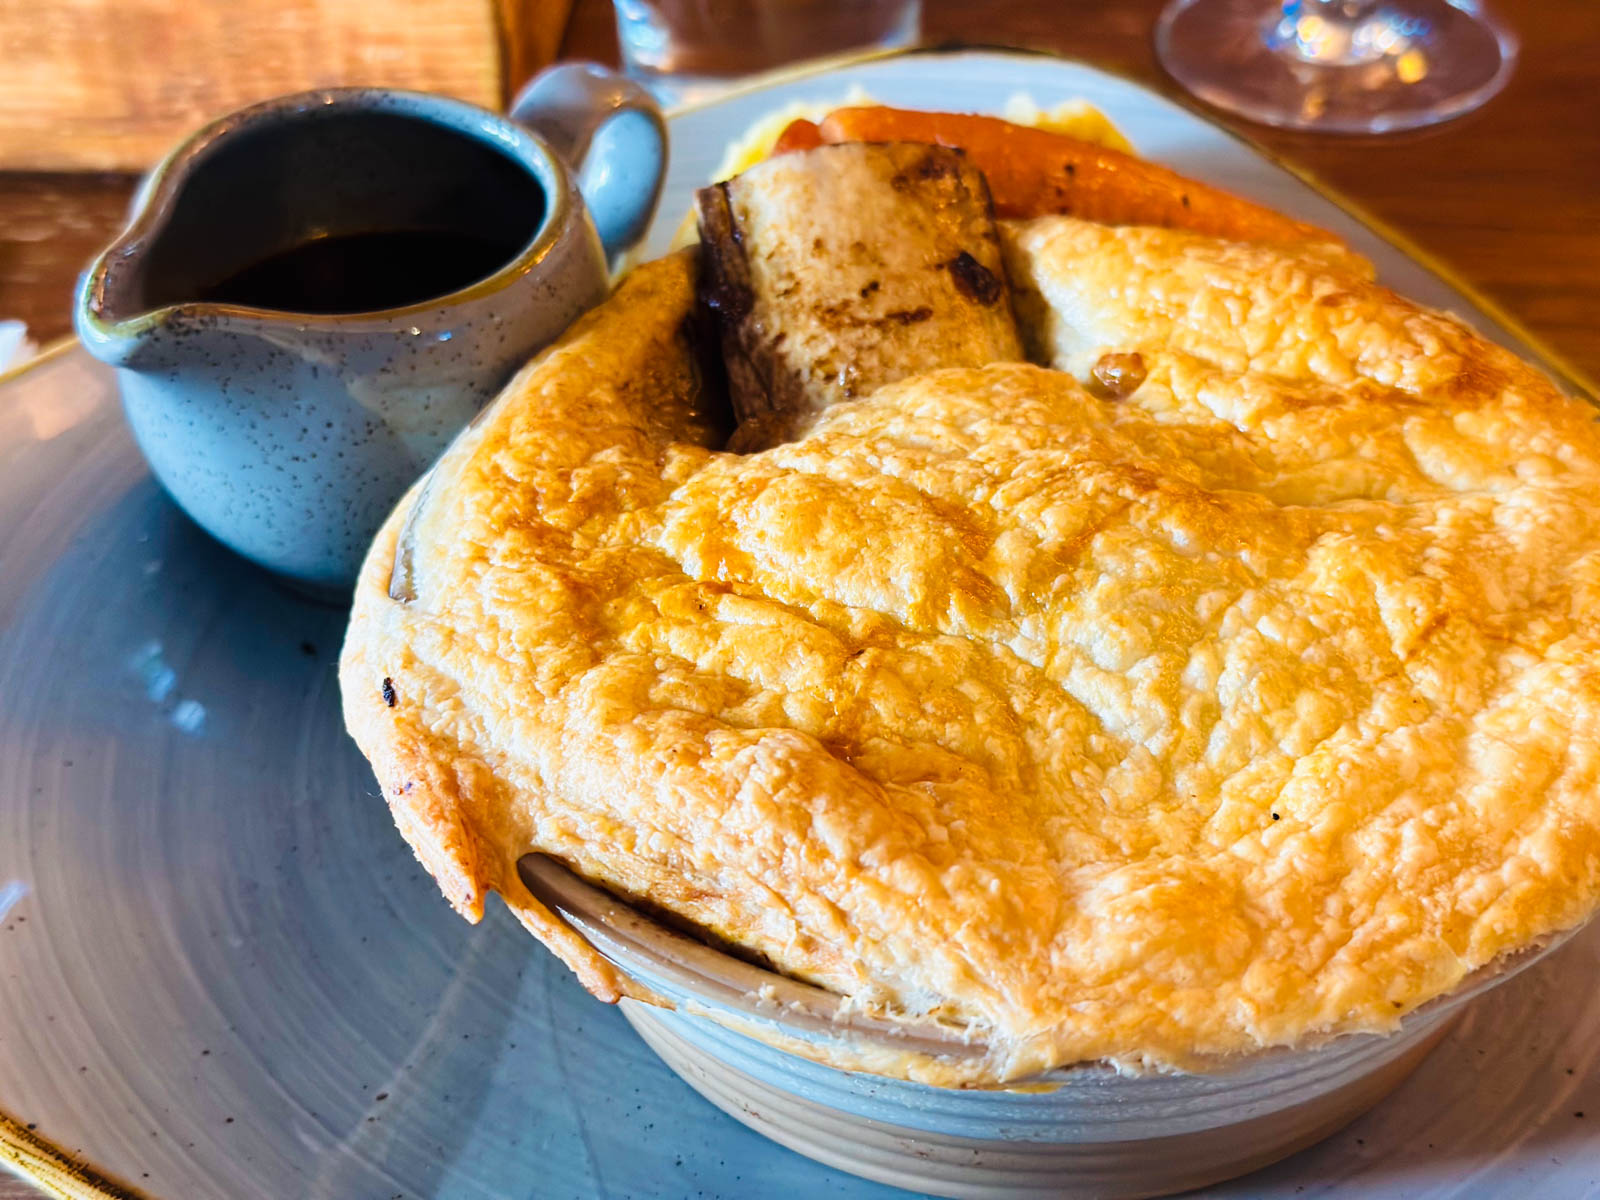 A pastry topped beef pie has a bone sticking out of the top and a pitcher of gravy on the side.